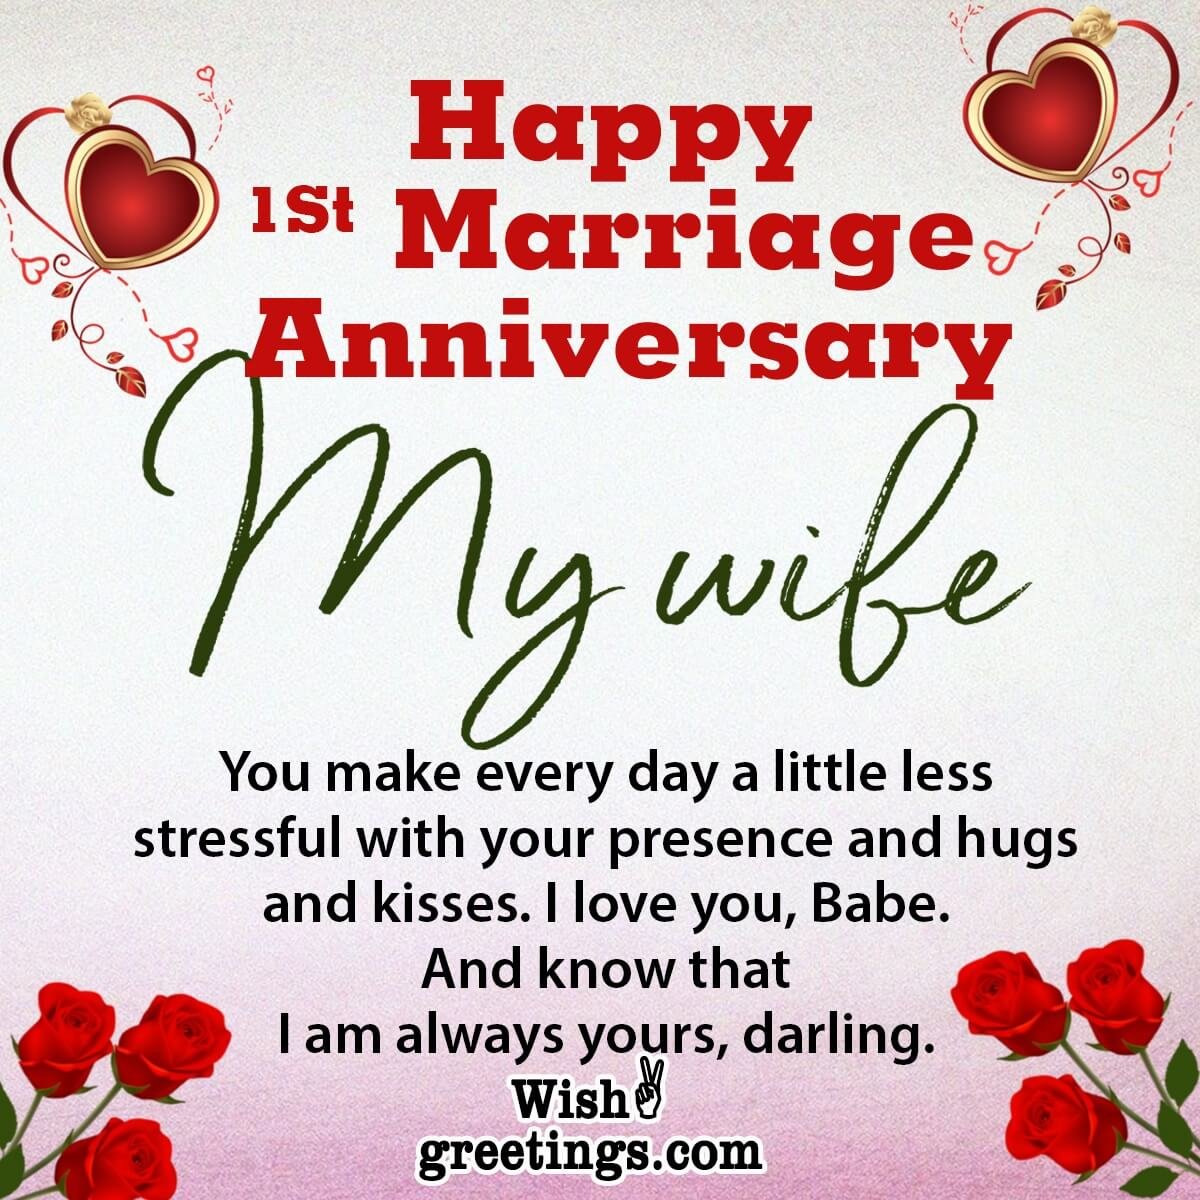 1st anniversary quotes for wife